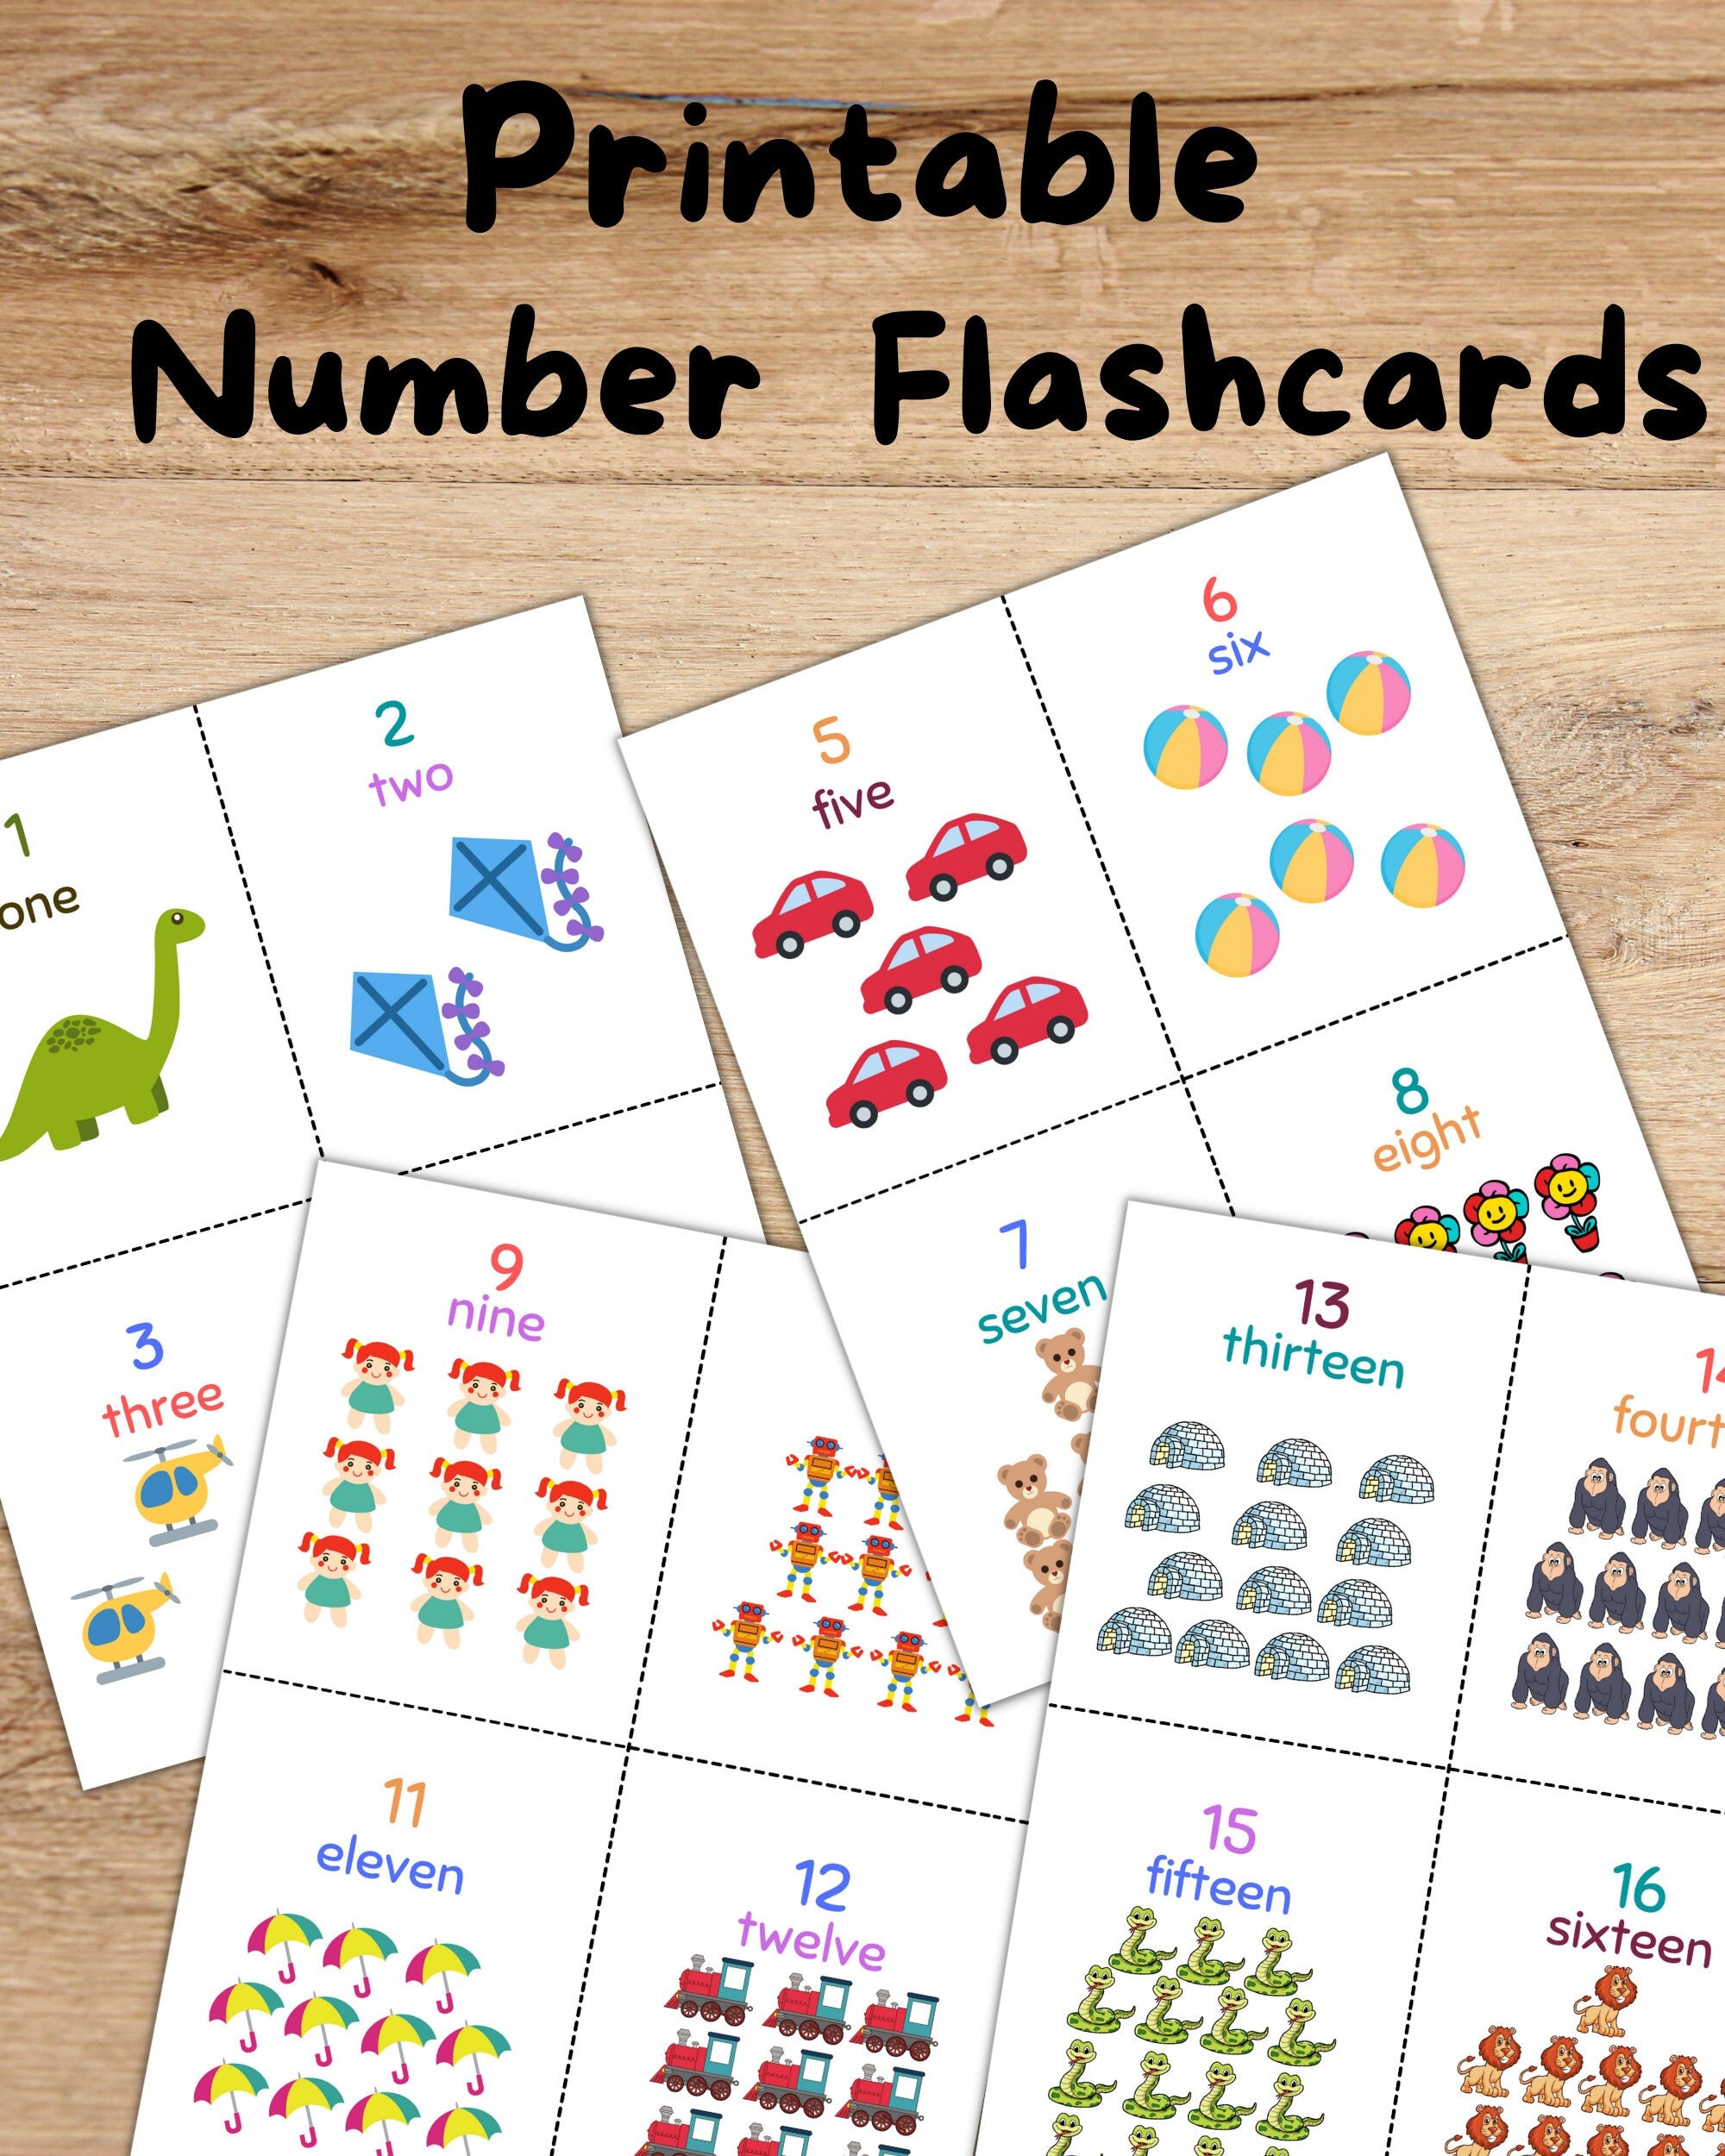 printable numbers 1 20 flash cards educational instant etsy australia